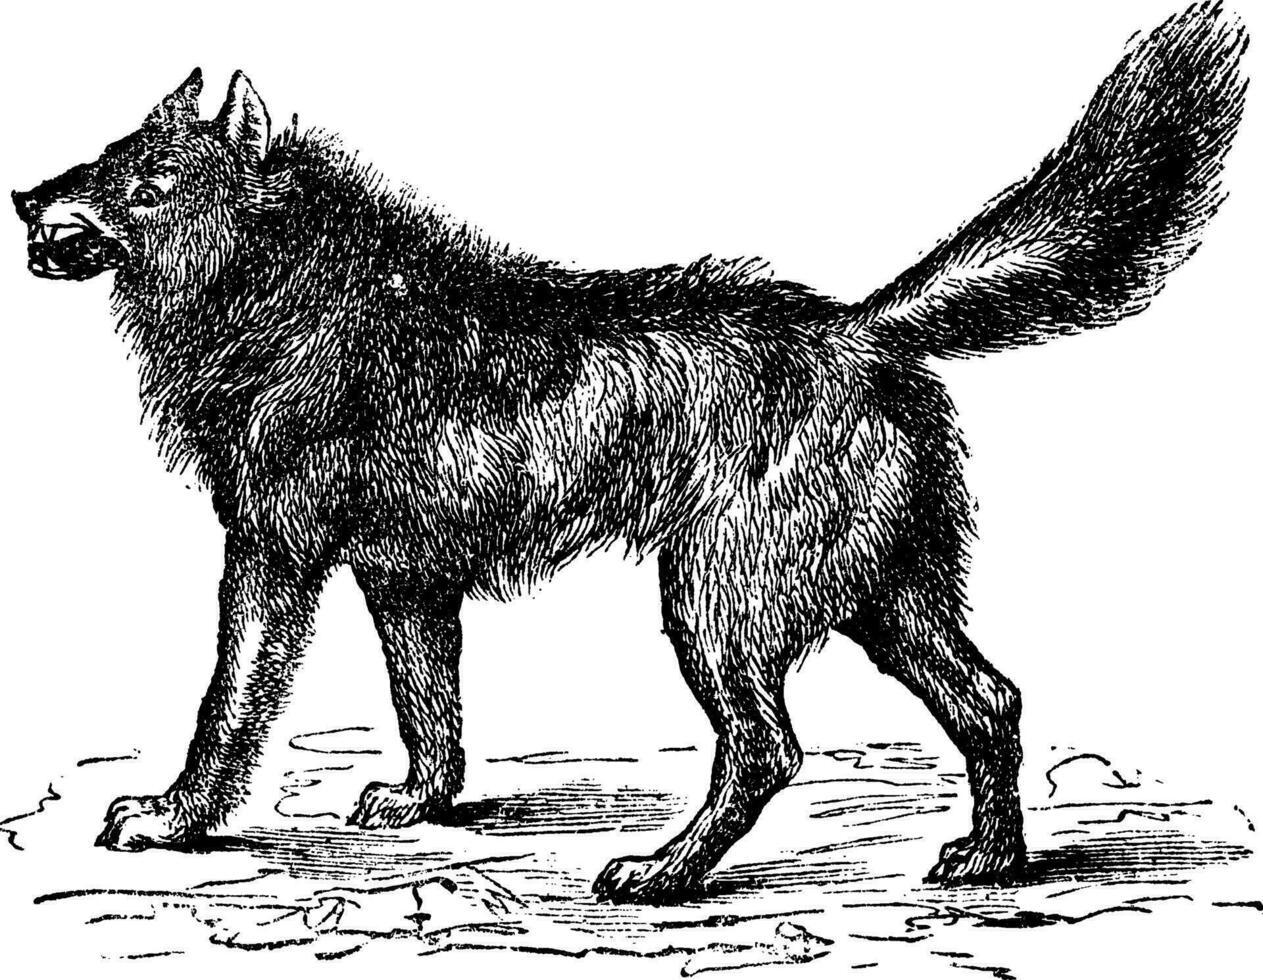 Eurasian Wolf or Canis lupus lupus vintage engraving vector